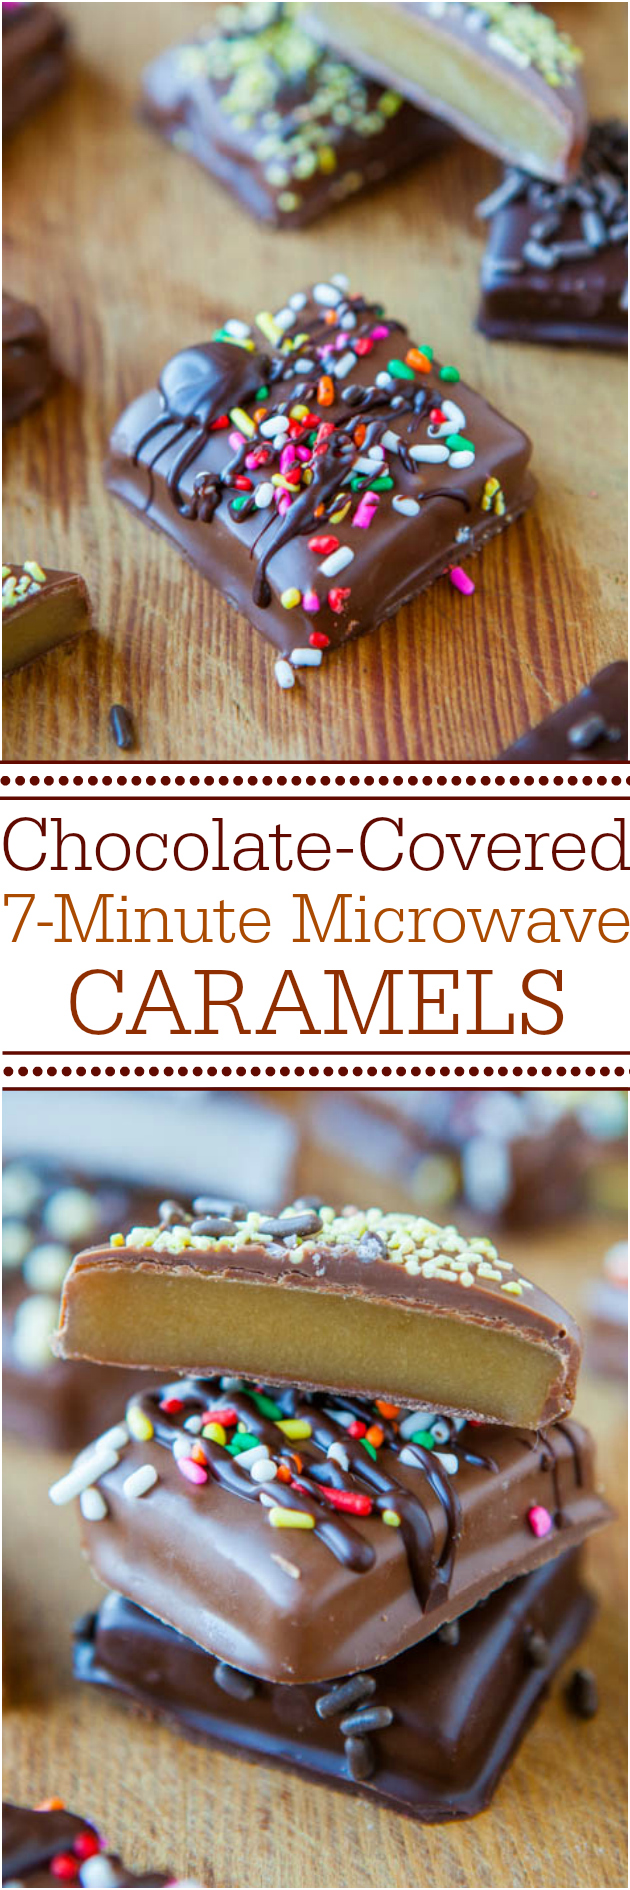 Chocolate-Covered 7-Minute Microwave Caramels - Never fear candy-making again with this no-candy-thermometer, goofproof recipe! The best and easiest caramels ever! Great for holidays and gifts!